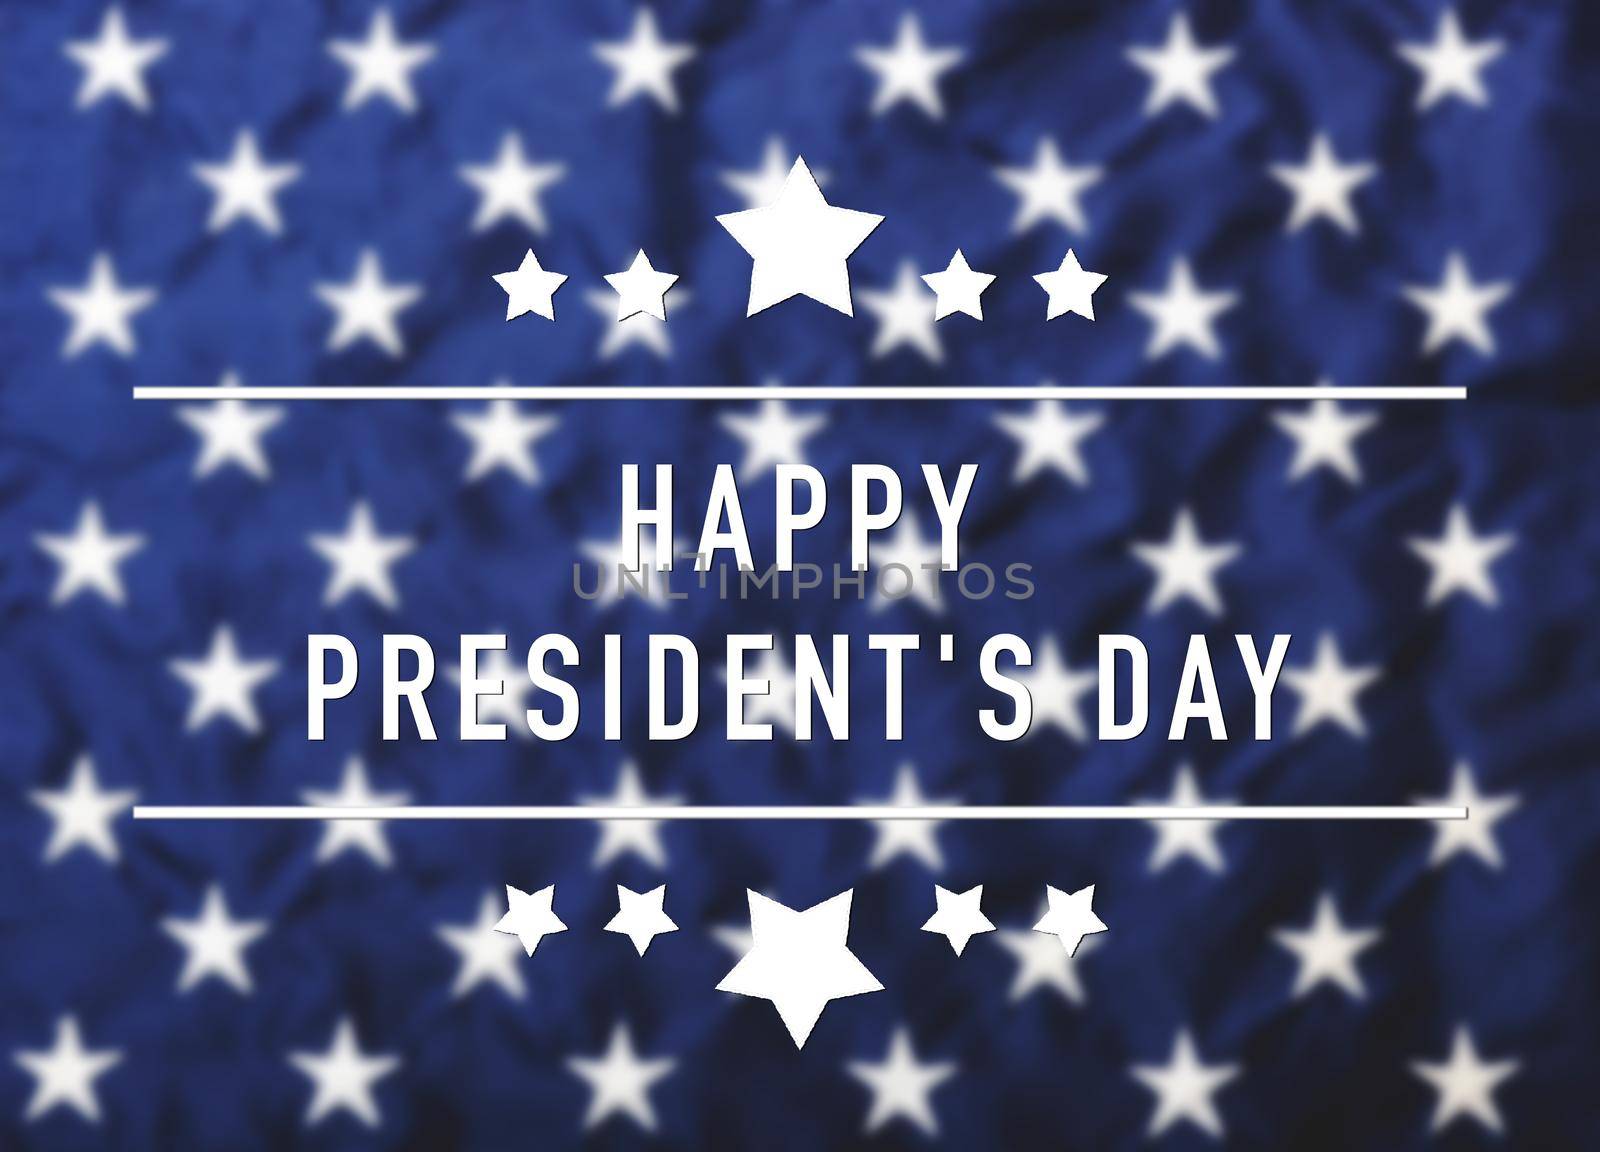 United States National Holidays. American or USA Flag with "HAPPY PRESIDENT'S DAY" text on flag background, President Day concept